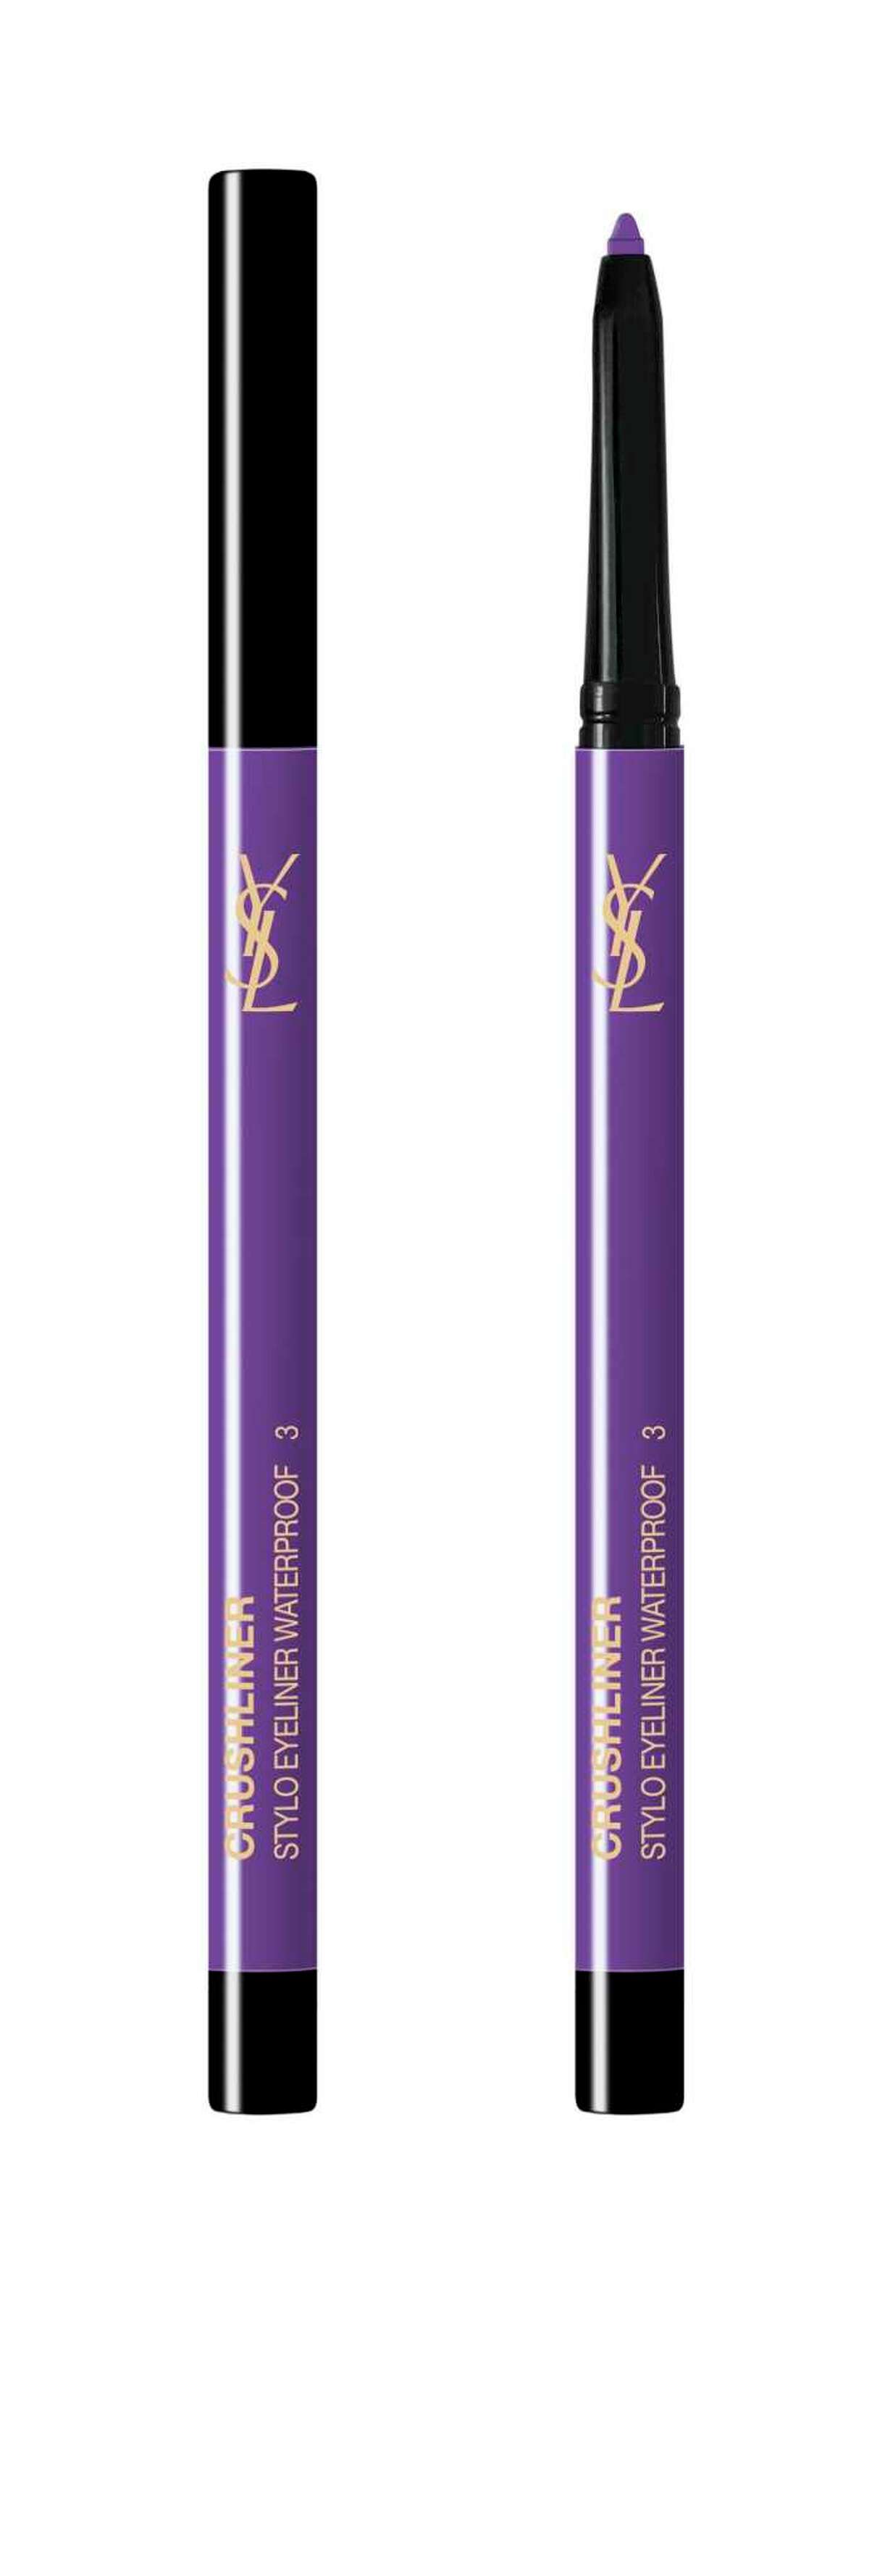 Violet Inspirant is one of seven colors of YSL Beauty Crushliner, a creamy, long-lasting eyeliner pencil.